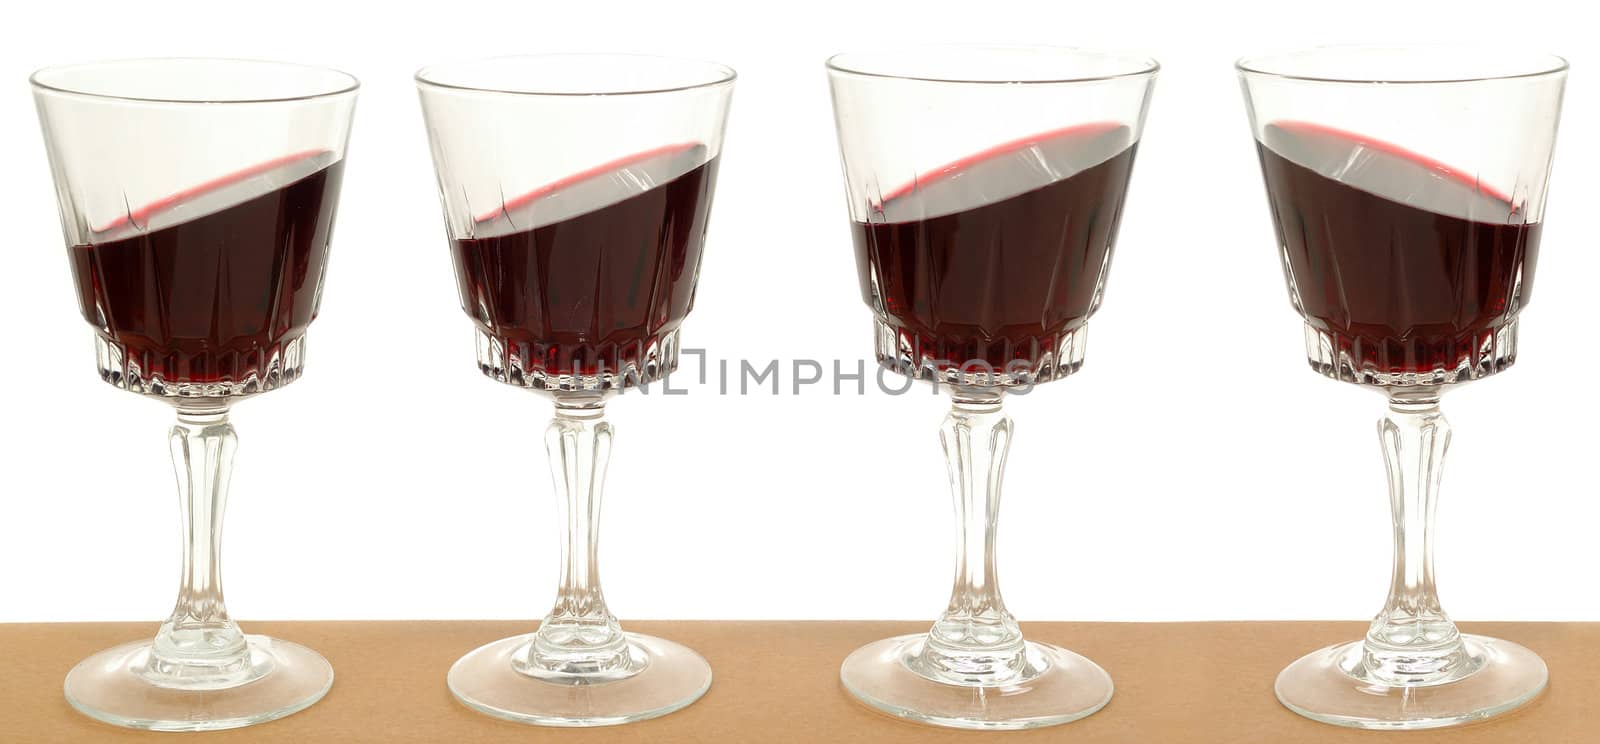 Wineglasses on a line by cfoto